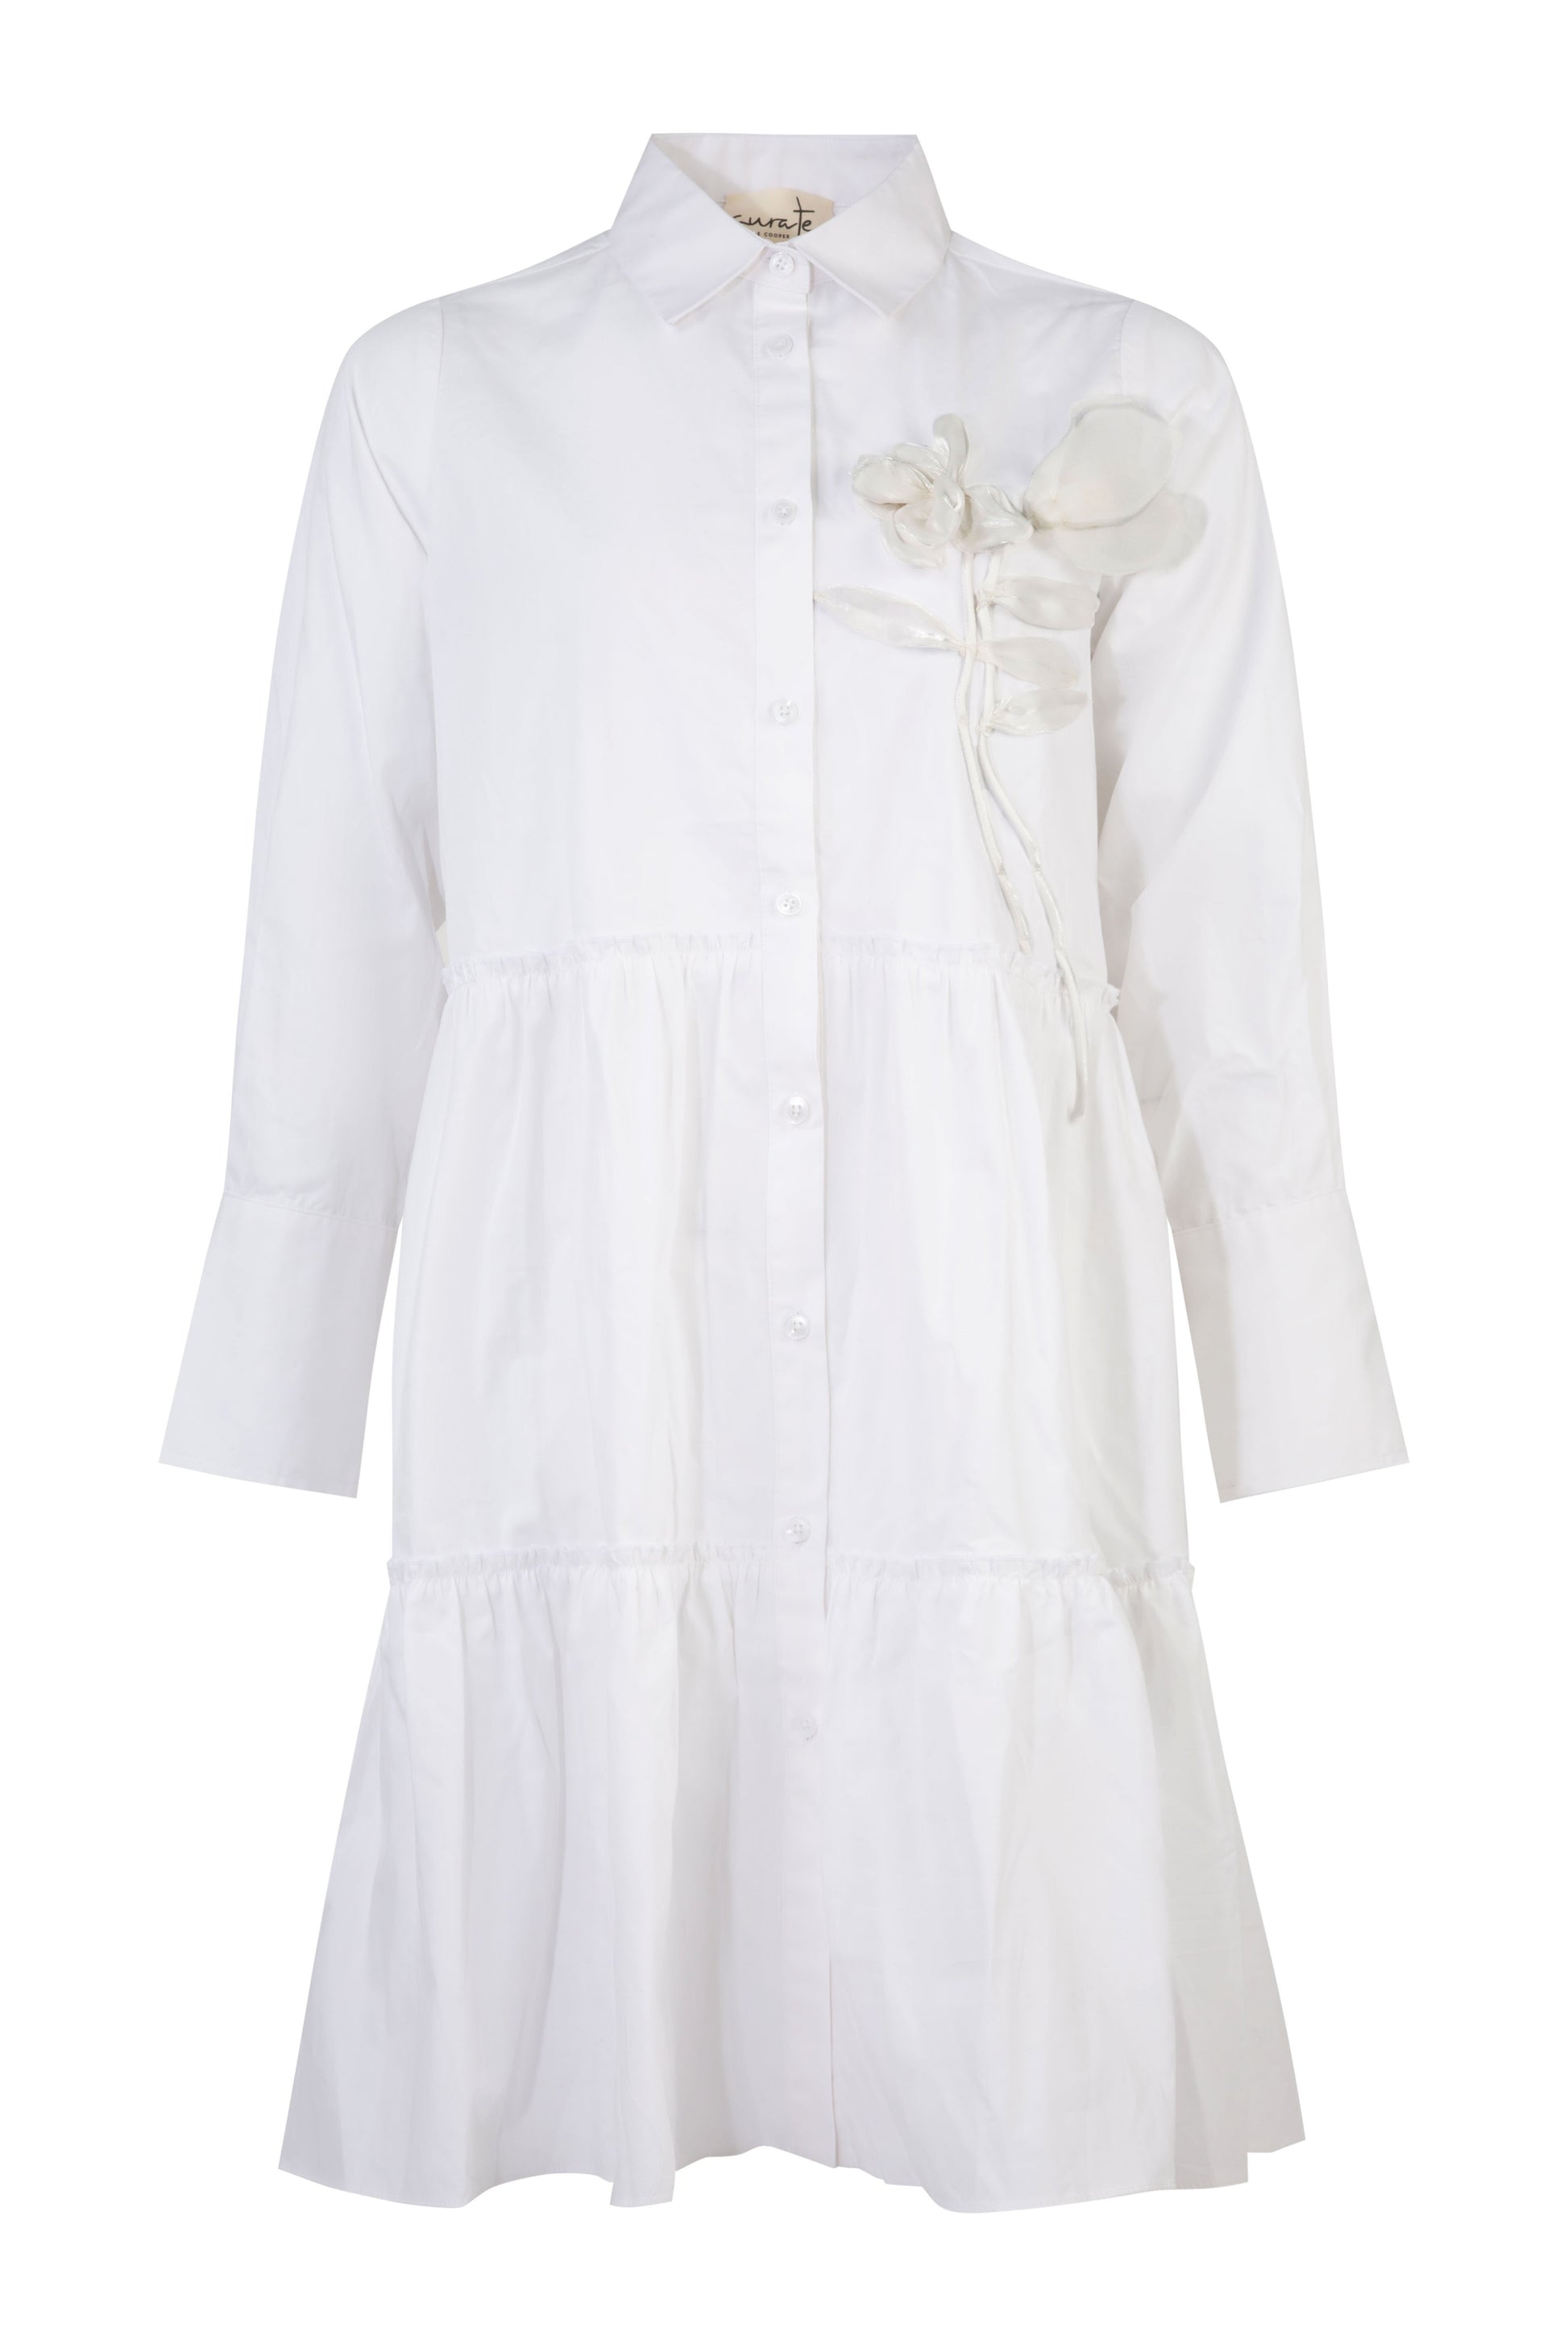 CURATE COMING INTO FOCUS SHIRT - WHITE - THE VOGUE STORE